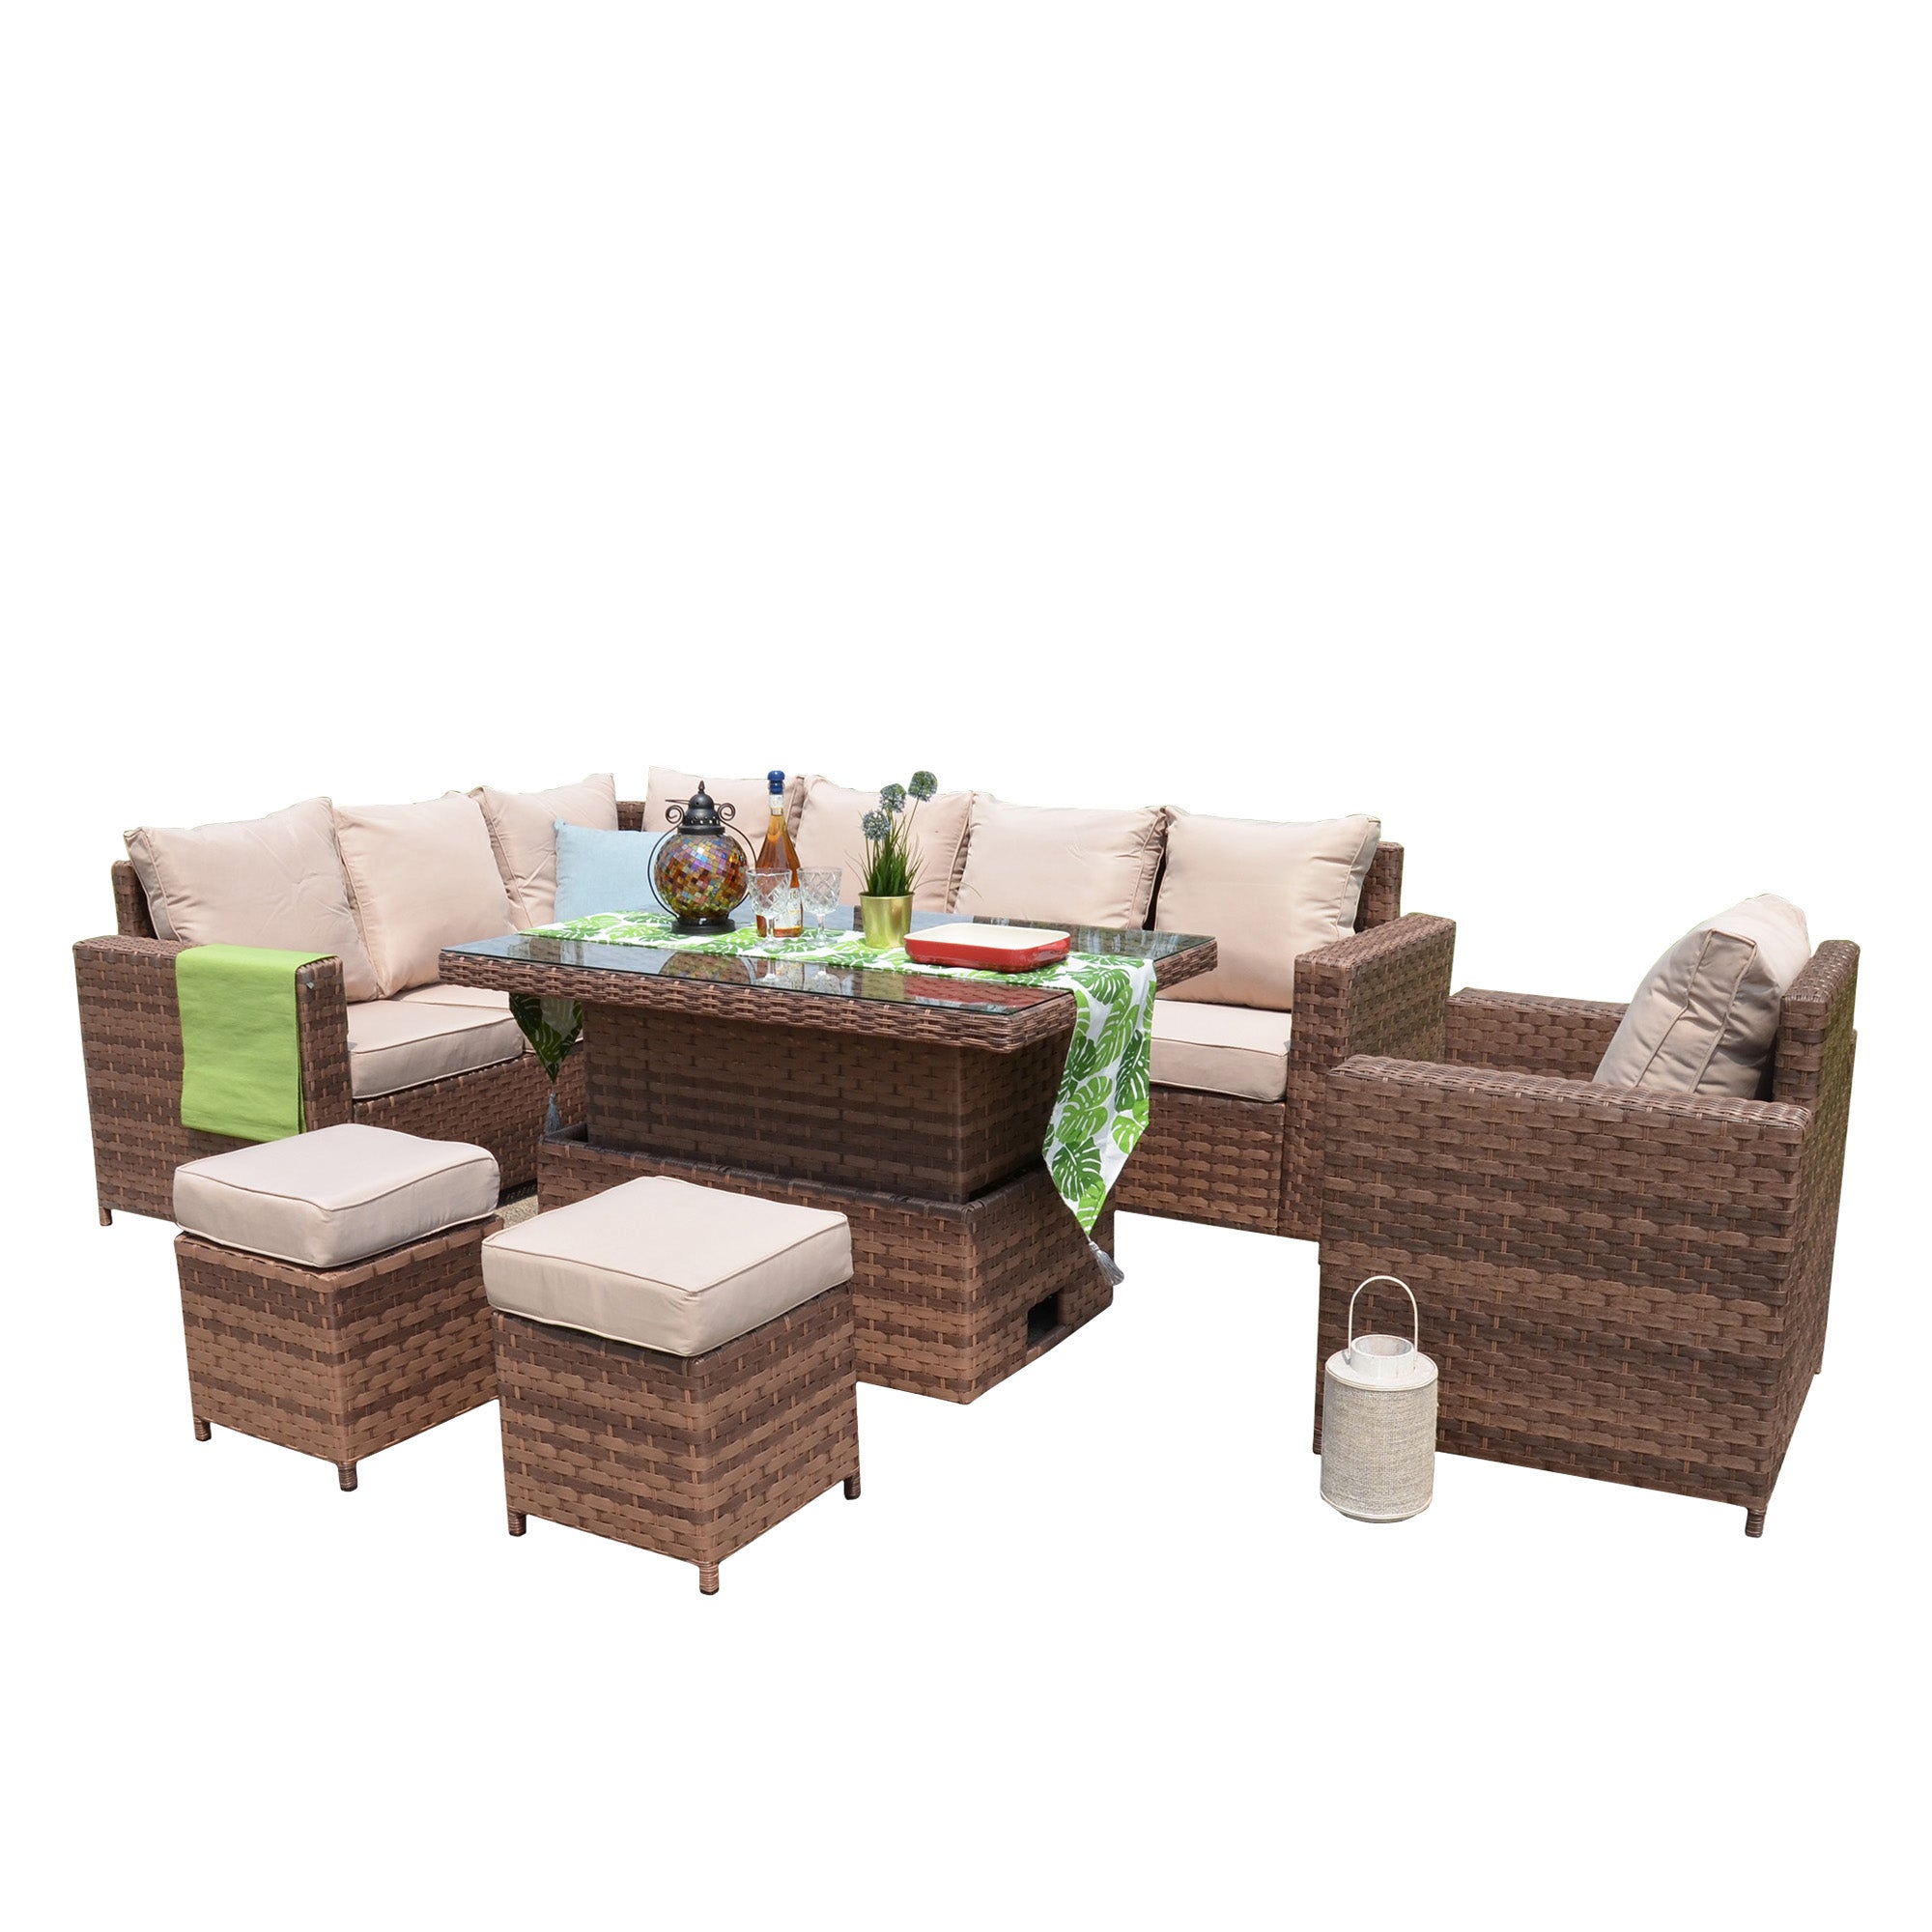 Canna Range High Back LHF Large Dining Corner Sofa Set with Rising Table and Armchair Table In Large Brown